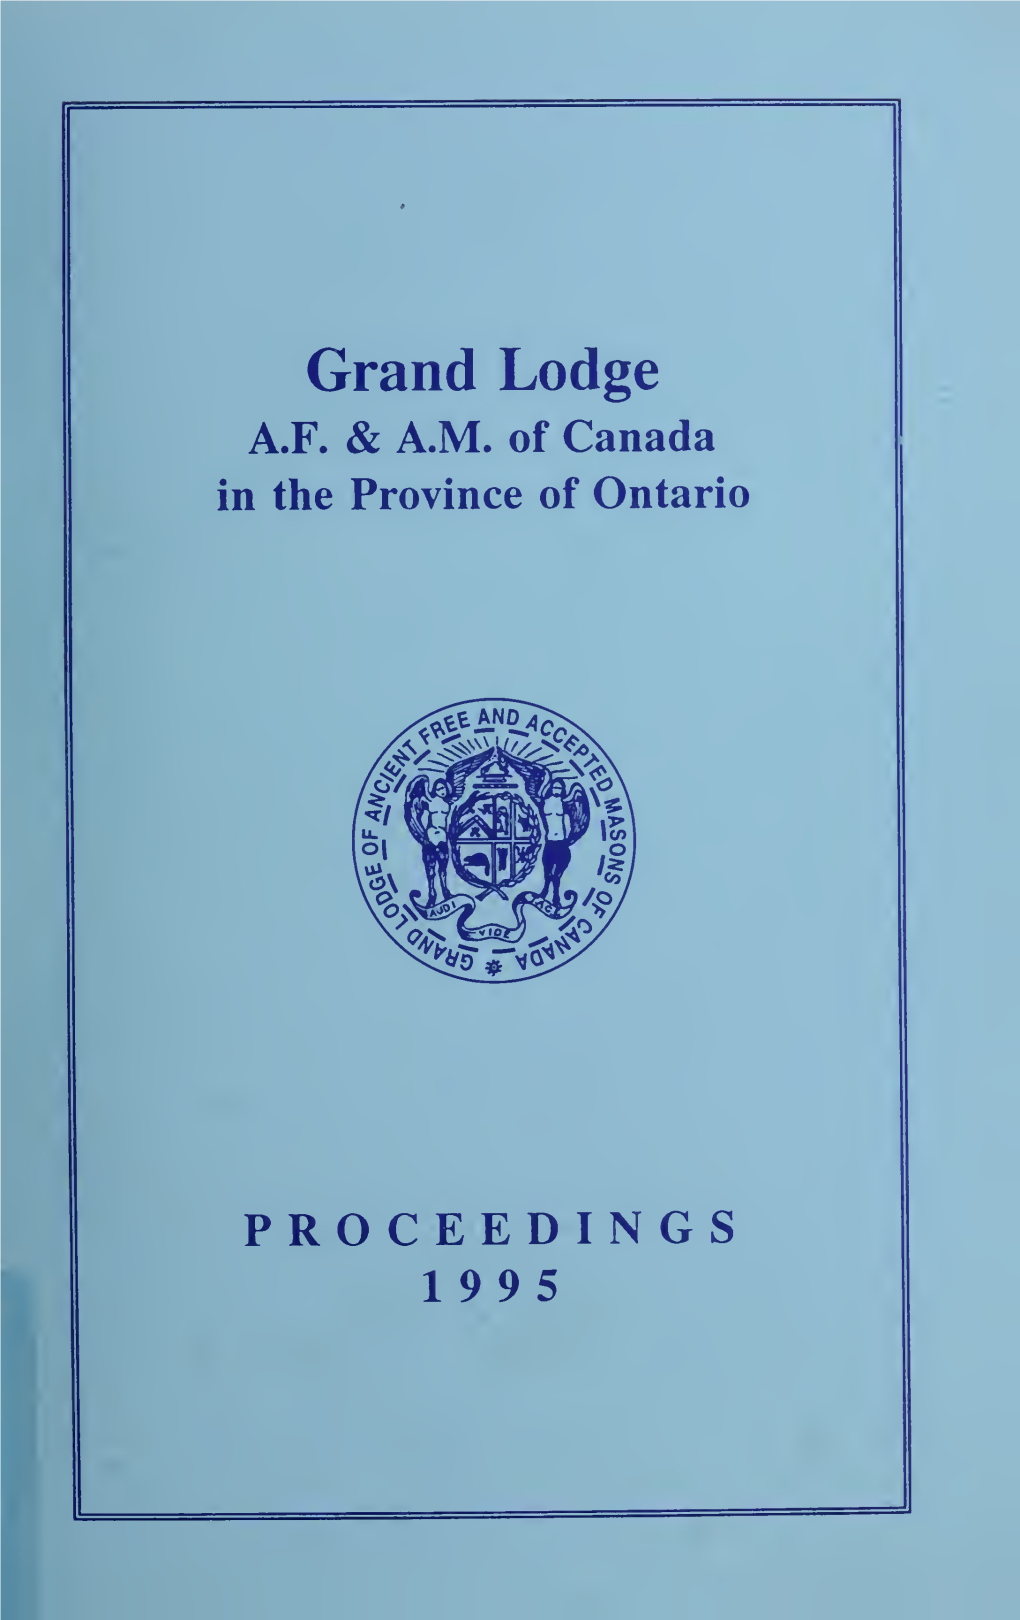 Grand Lodge of AF & AM of Canada, 1995